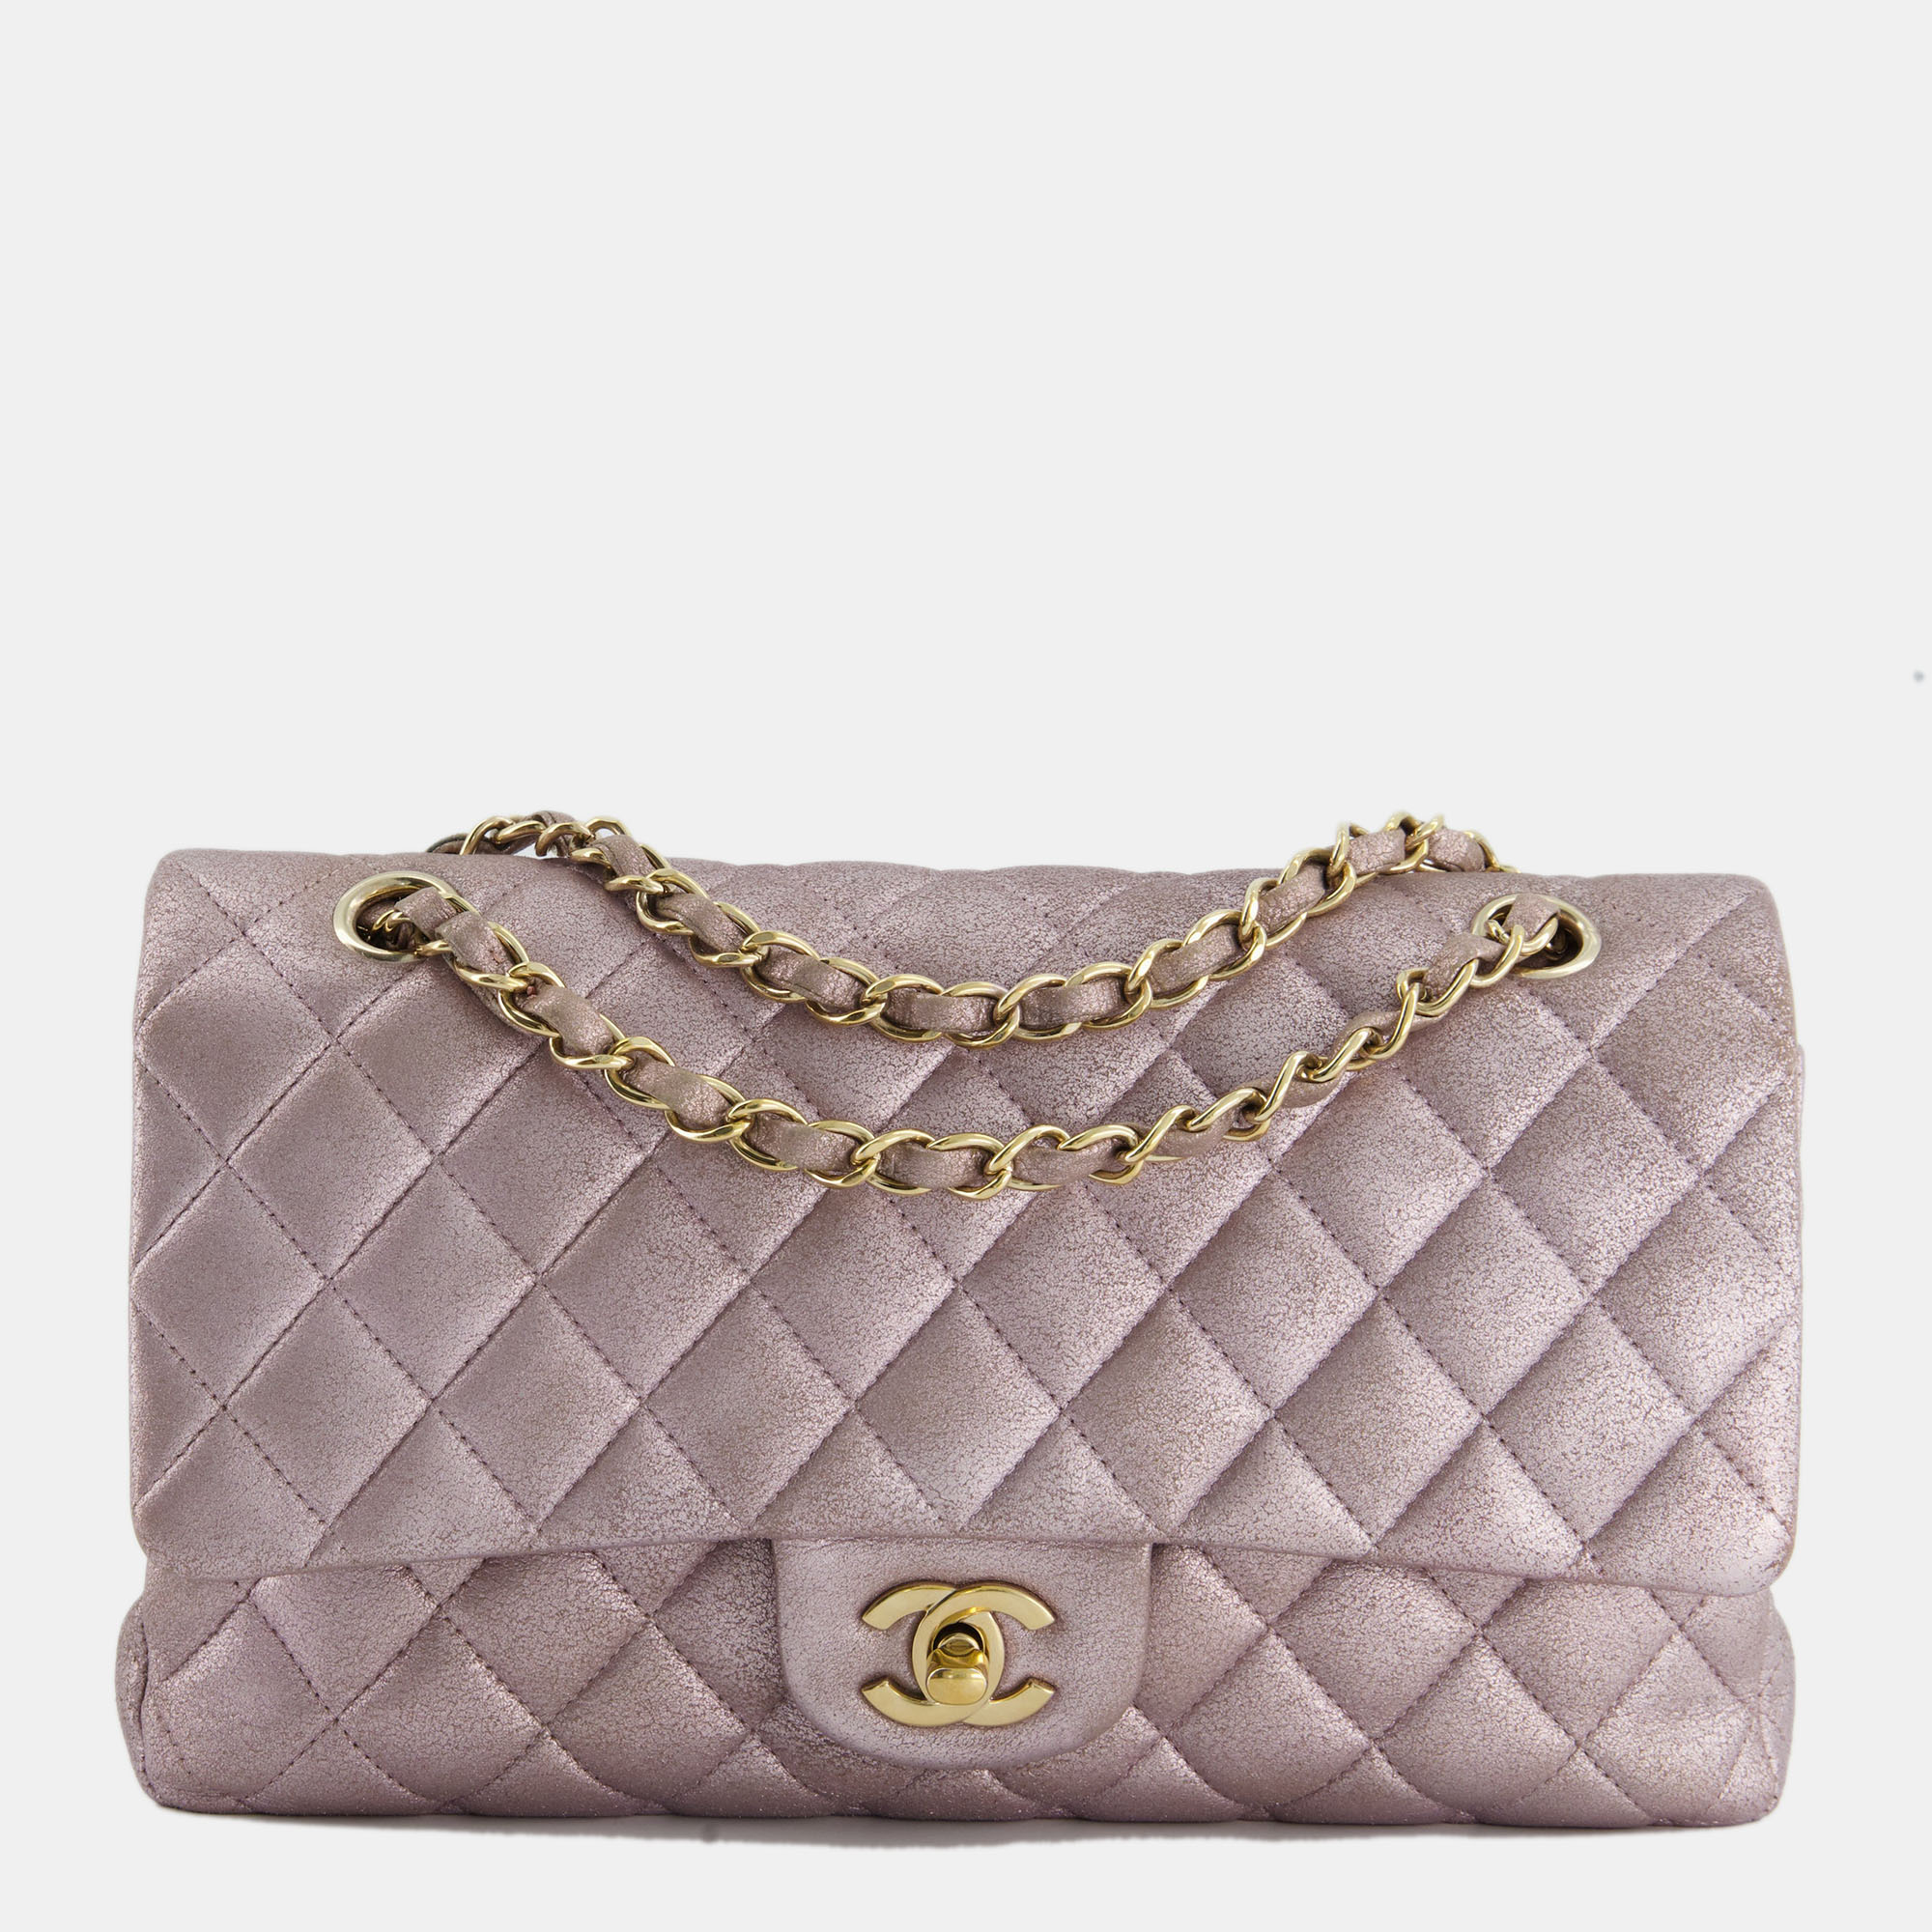 Chanel metallic rose gold medium classic double flap bag in coated calfskin with champagne gold hardware